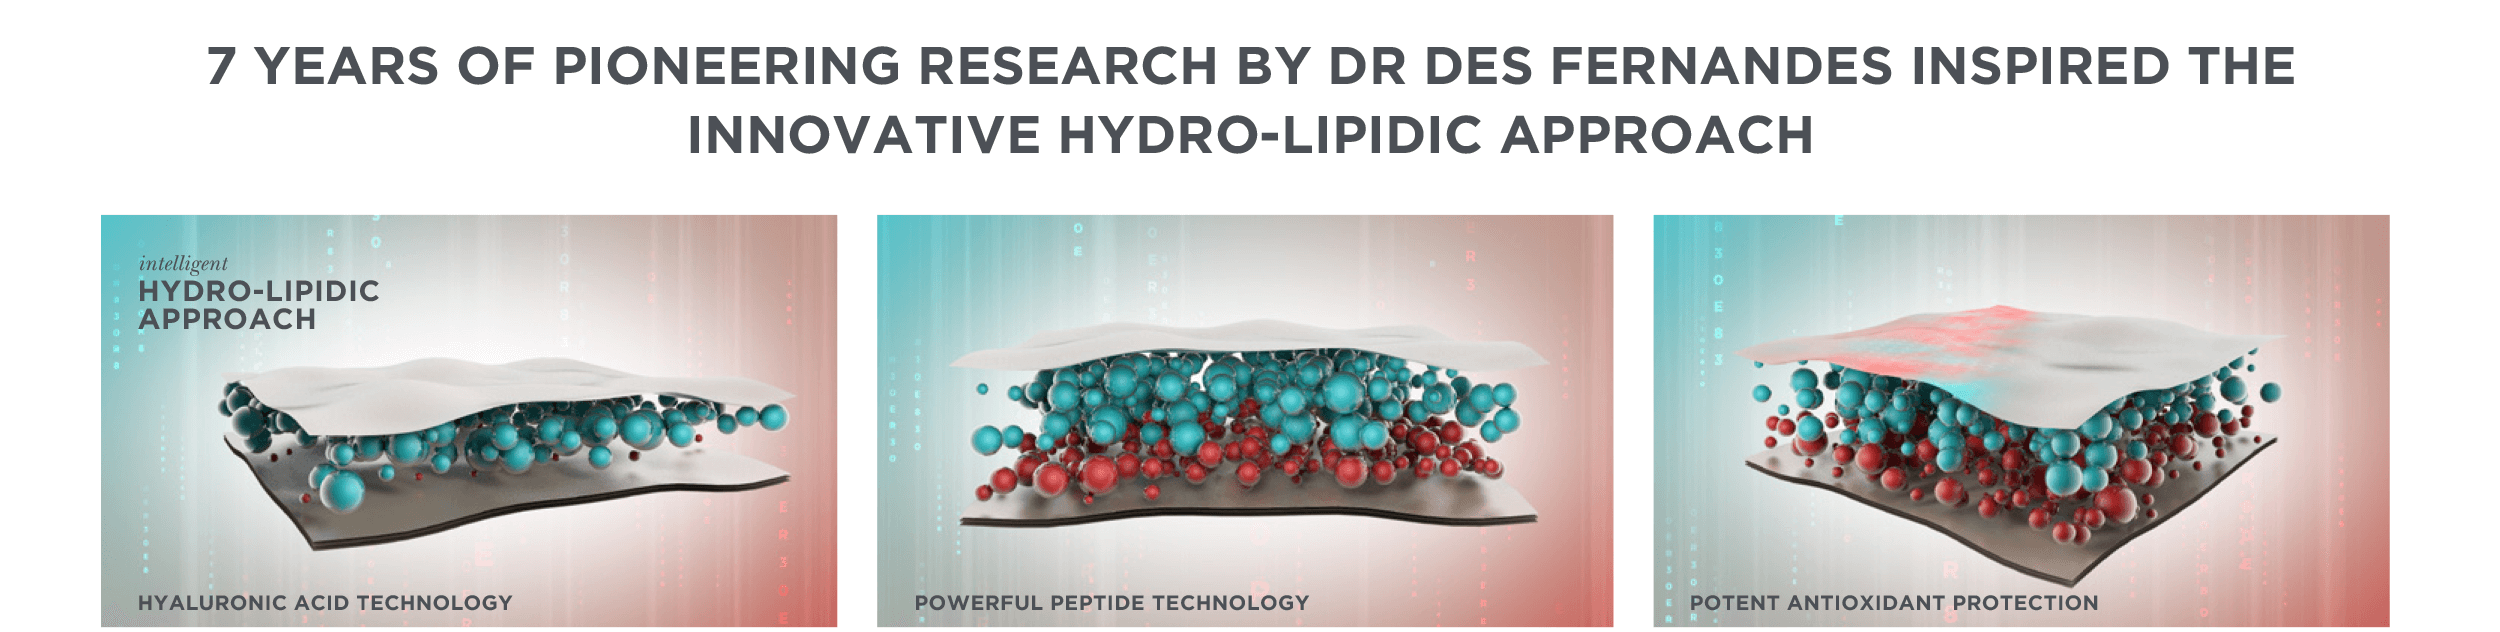 7 YEARS OF PIONEERING RESEARCH BY DR DES FERNANDES INSPIRED THE INNOVATIVE HYDRO-LIPIDIC APPROACH